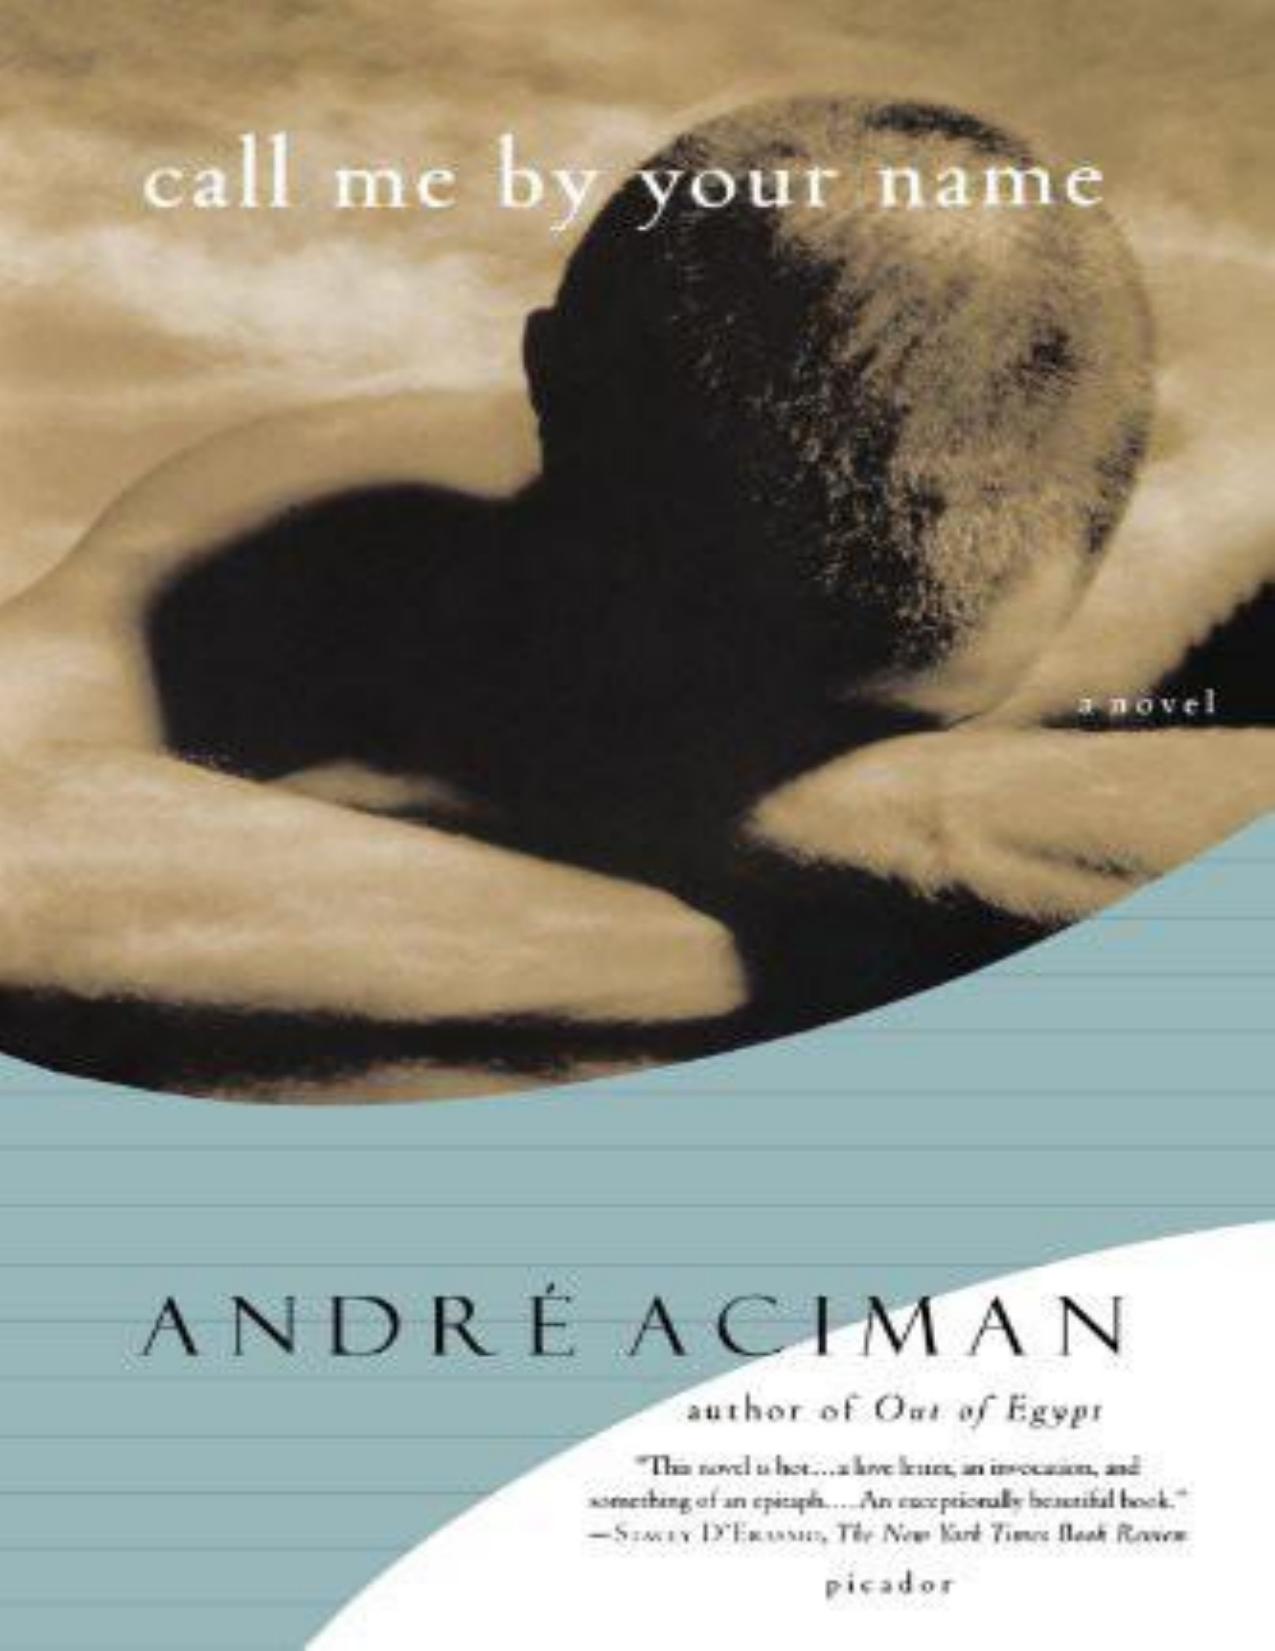 Call Me by Your Name: A Novel by André Aciman